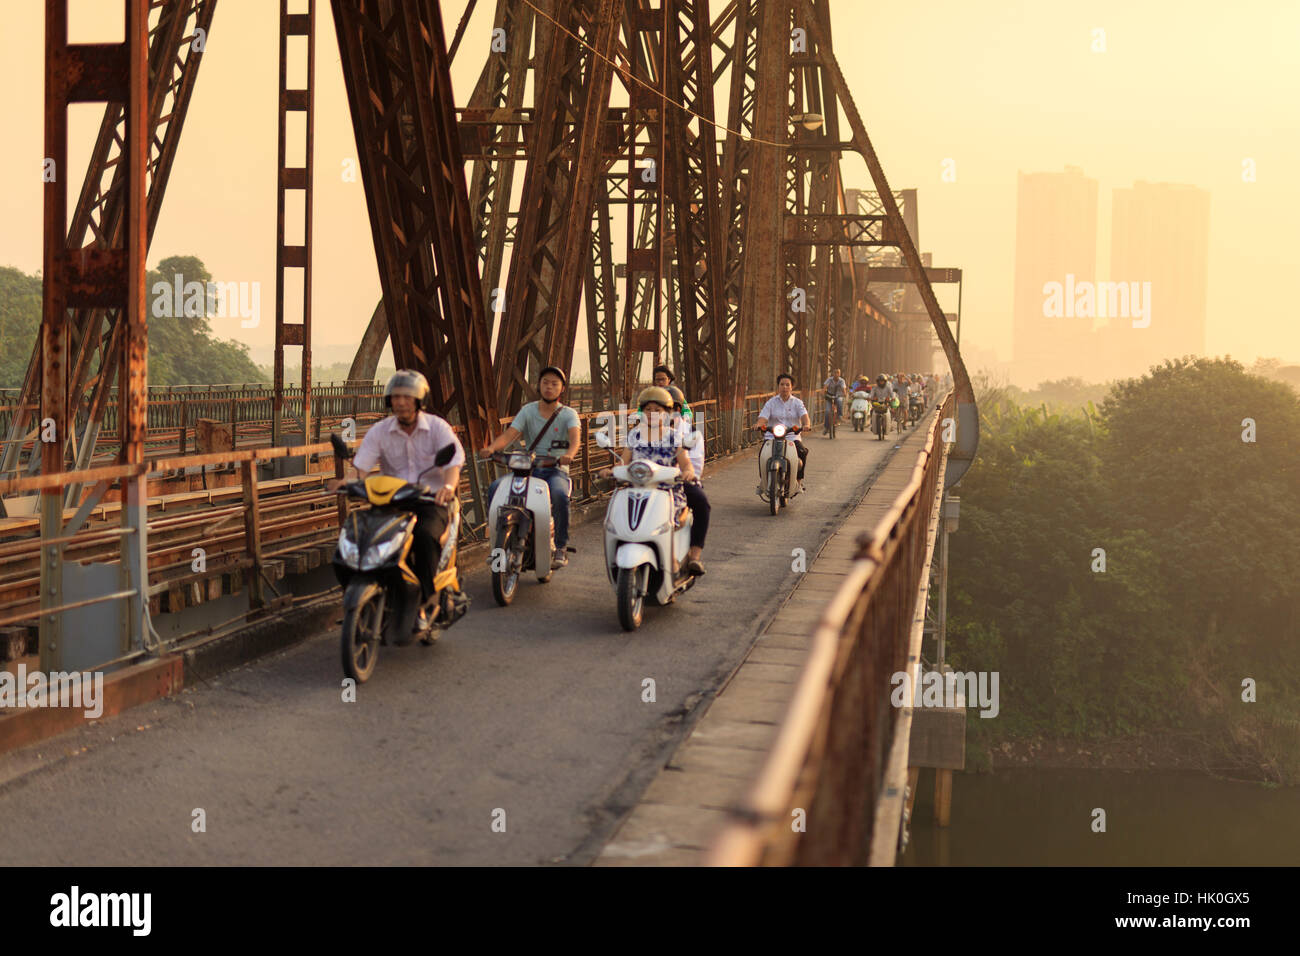 Commuters on the Long Bien Bridge over the Red River in Hanoi, Vietnam, Indochina, Southeast Asia Stock Photo